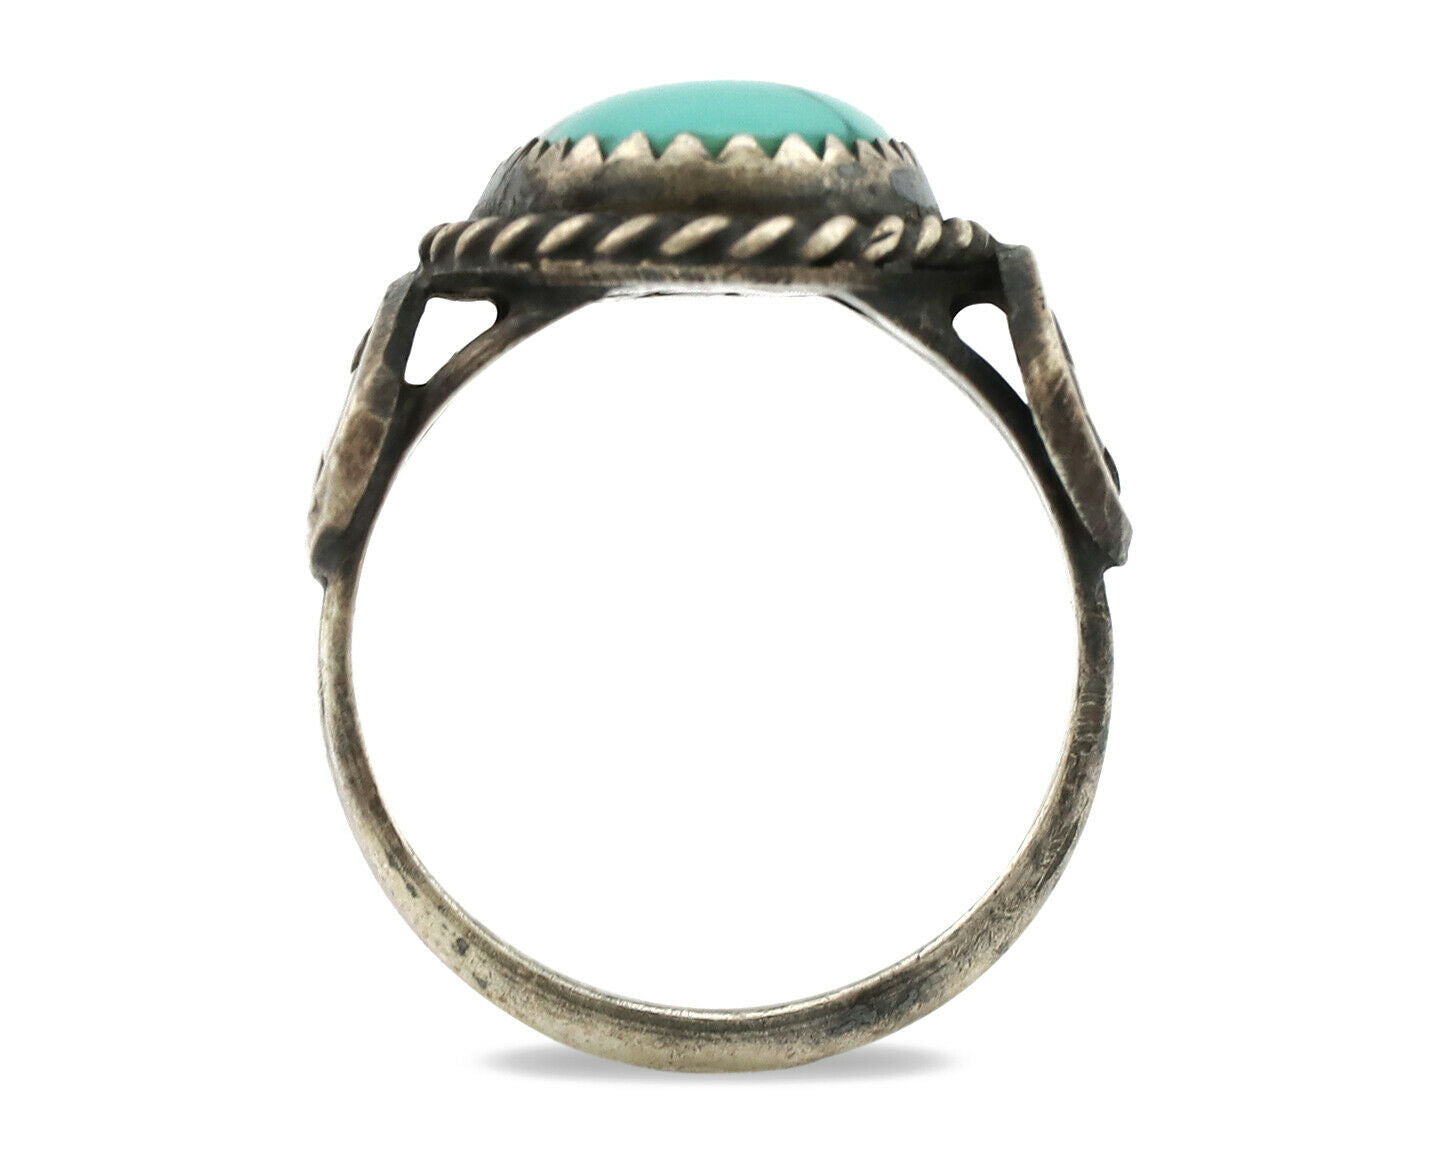 Navajo Ring .925 Silver Blue Turquoise Artist Signed FA C.1980's